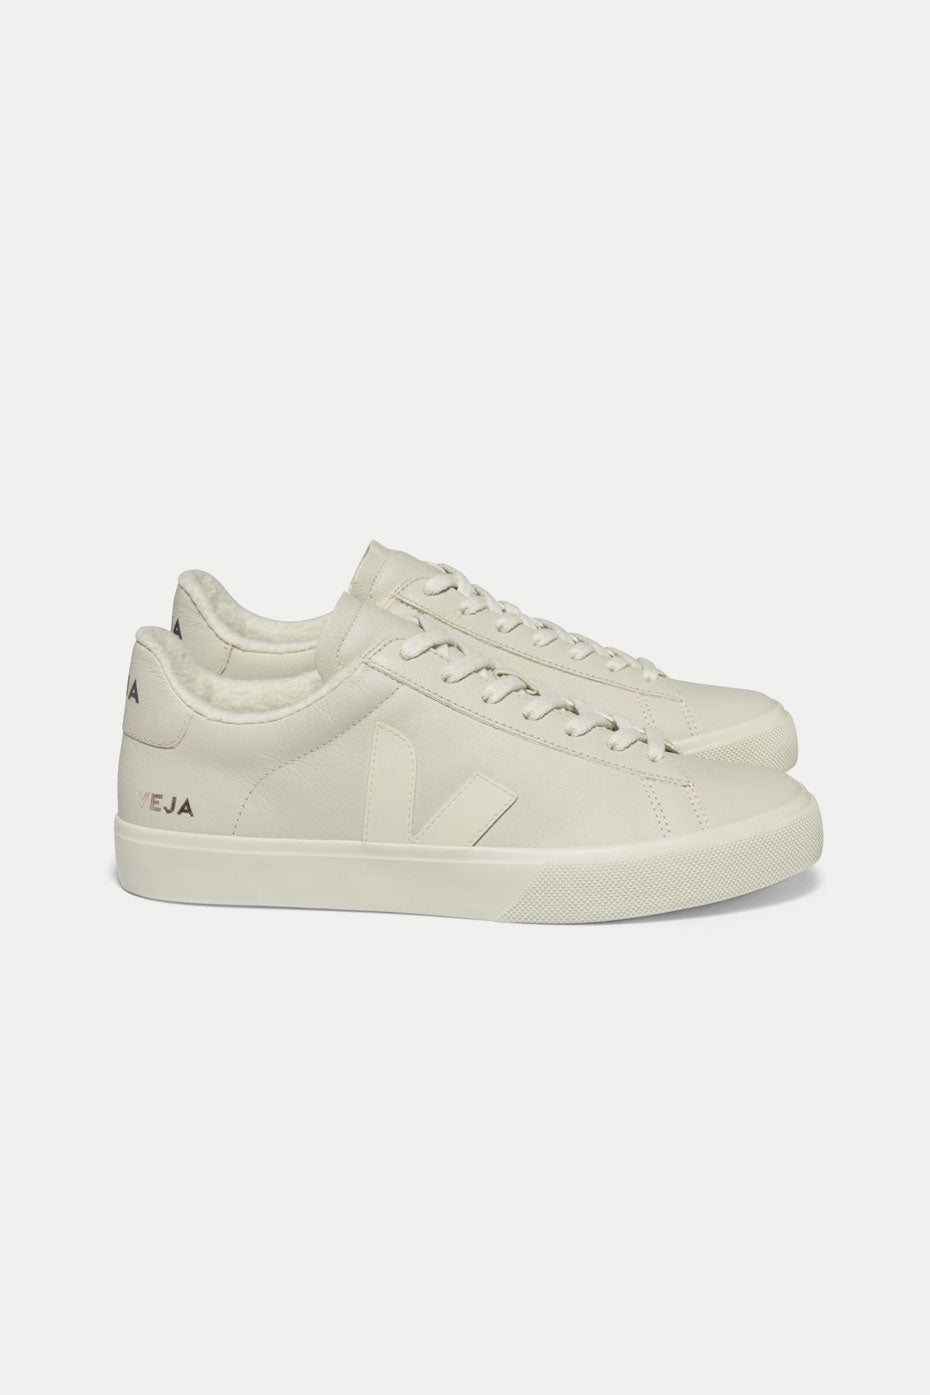 Veja Pierre Campo Chromefree Leather Trainer Womens